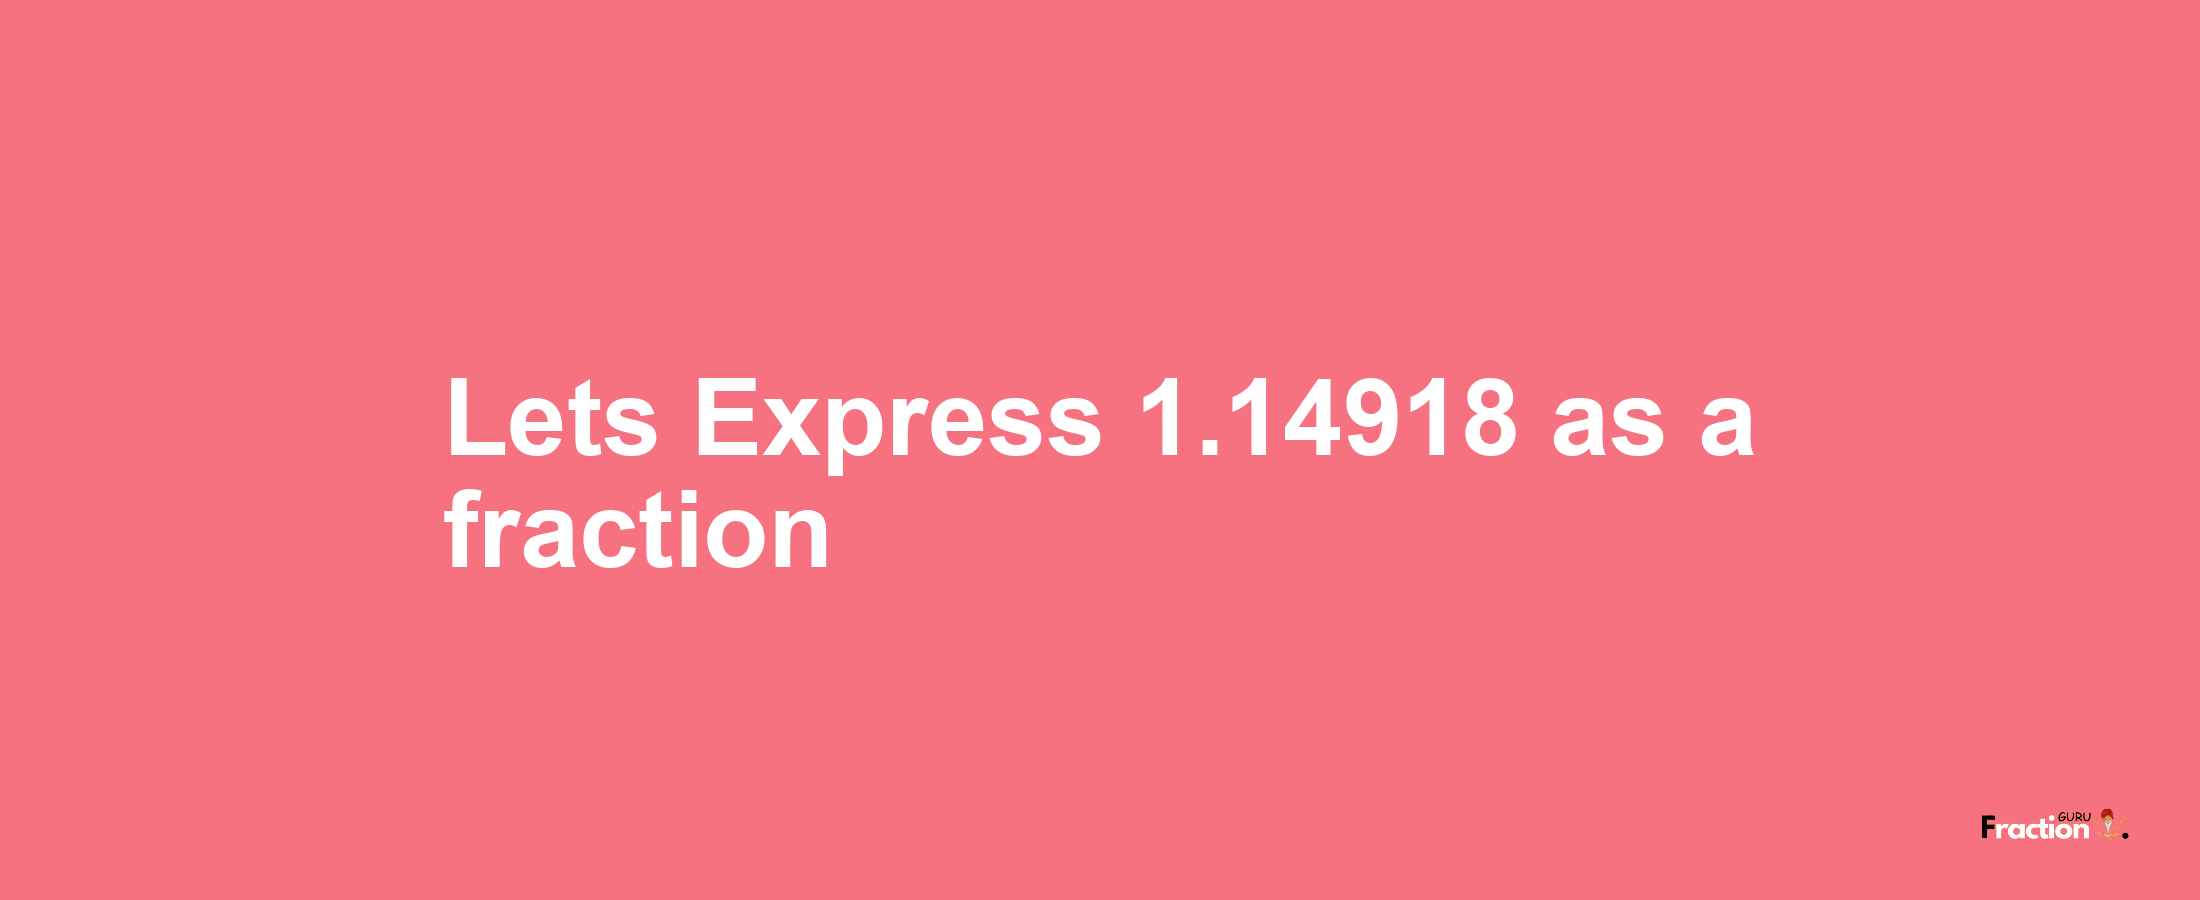 Lets Express 1.14918 as afraction